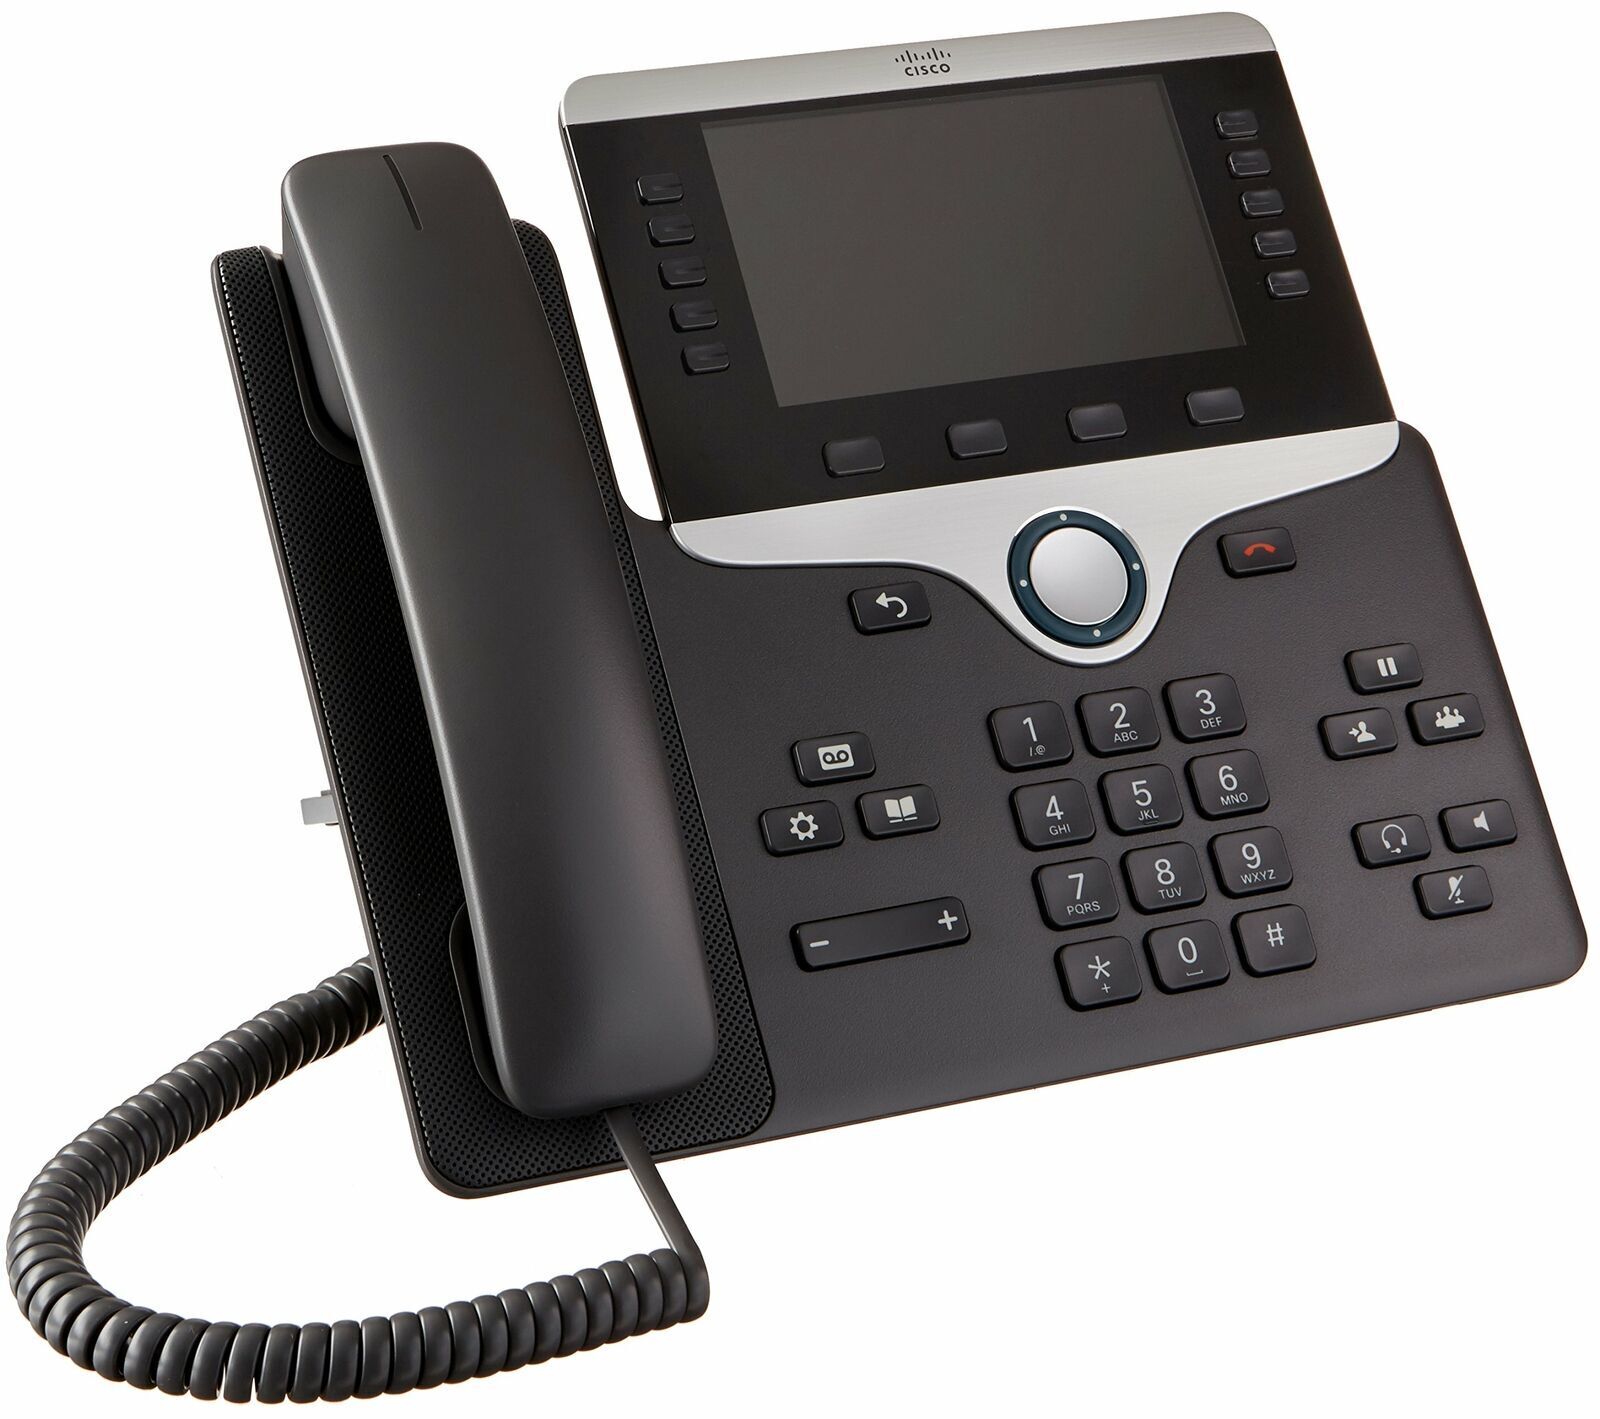 Cisco 8851 Series VoIP Business Phone with Bluetooth and 5 Lines, CP-8851-K9